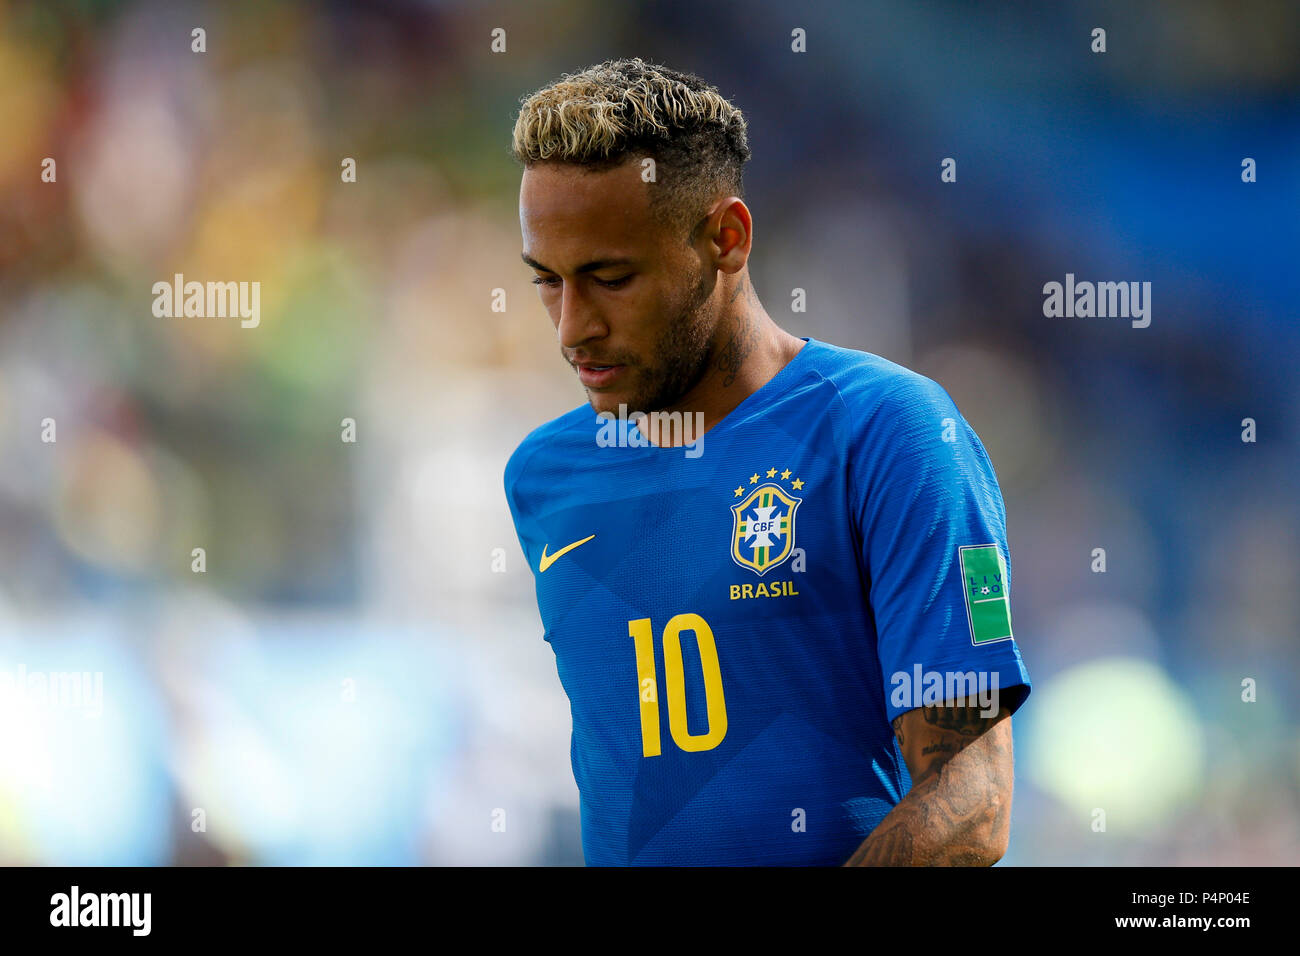 Saint Petersburg, Russia. 22nd June 2018. Neymar of Brazil during the 2018 FIFA World Cup Group E match between Brazil and Costa Rica at Saint Petersburg Stadium on June 22nd 2018 in Saint Petersburg, Russia. (Photo by Daniel Chesterton/phcimages.com) Credit: PHC Images/Alamy Live News Stock Photo